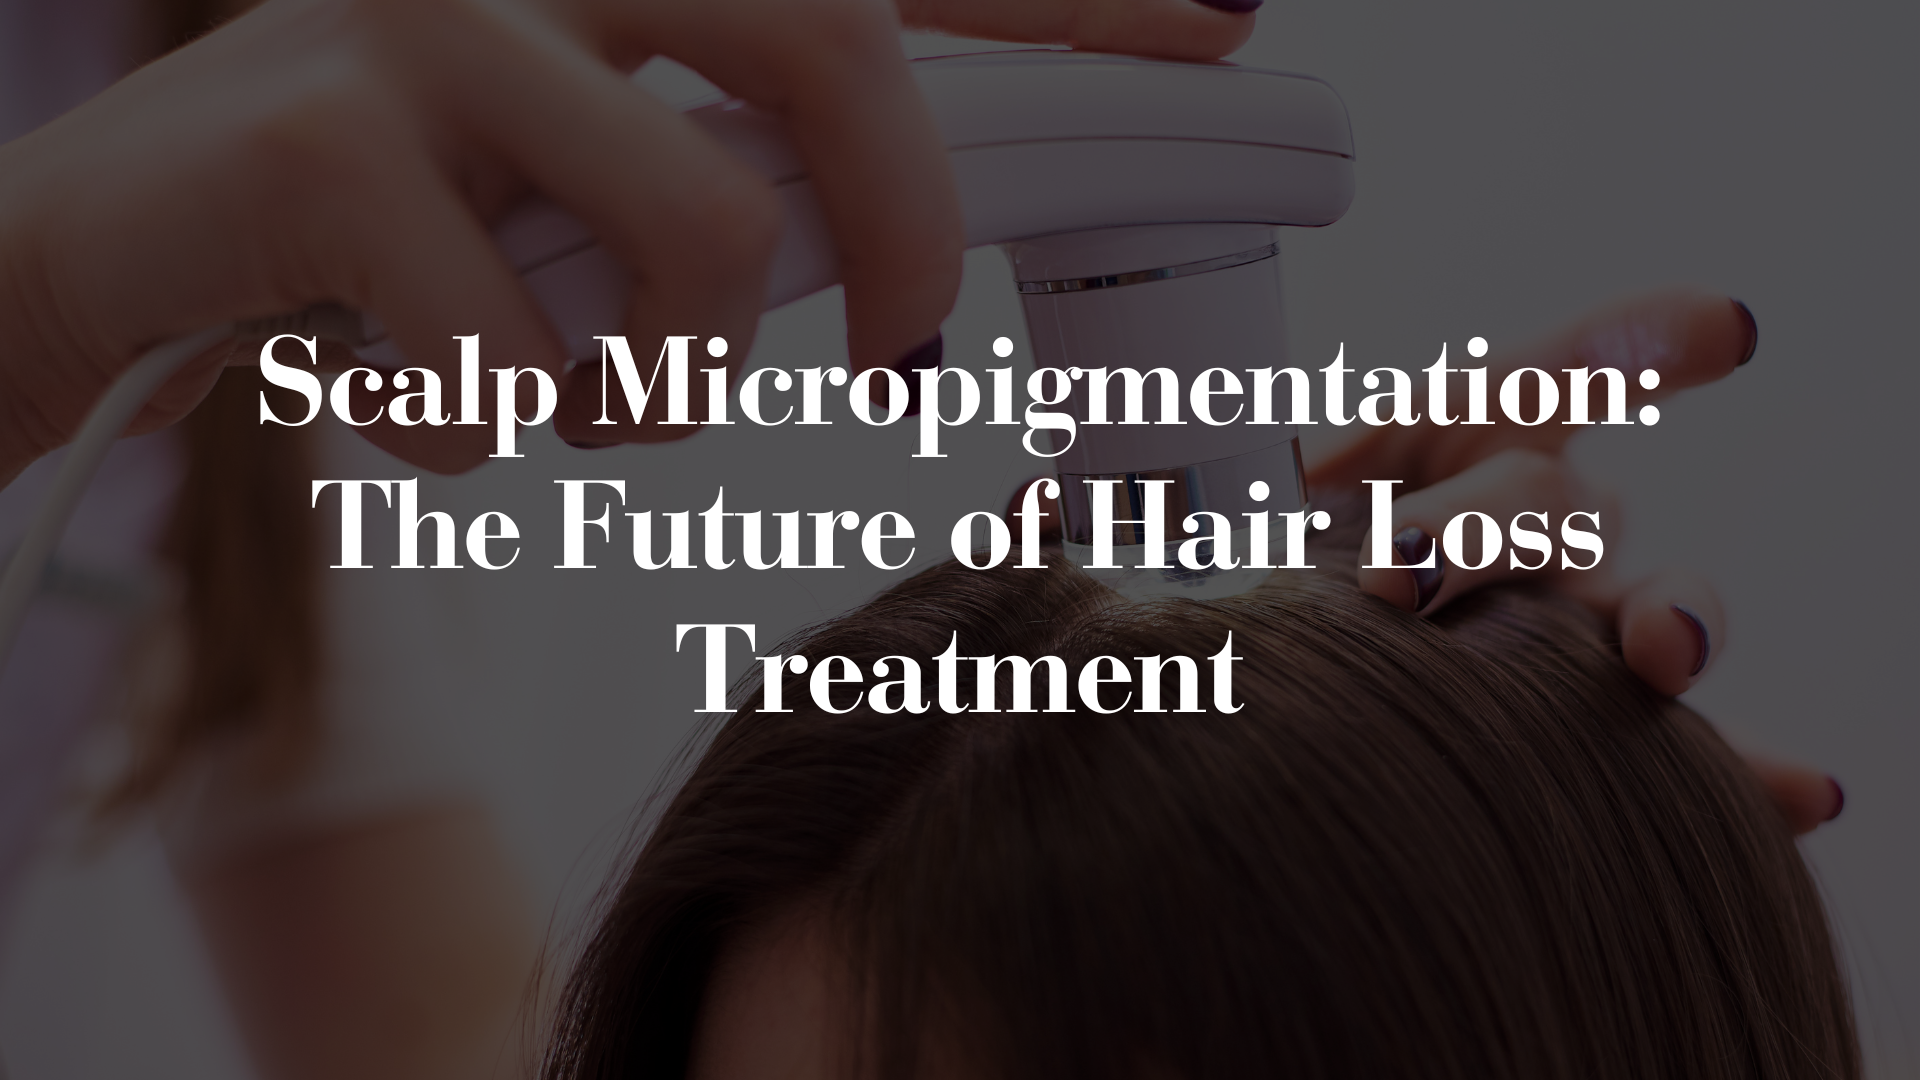 SMP: the future of hair loss treatments